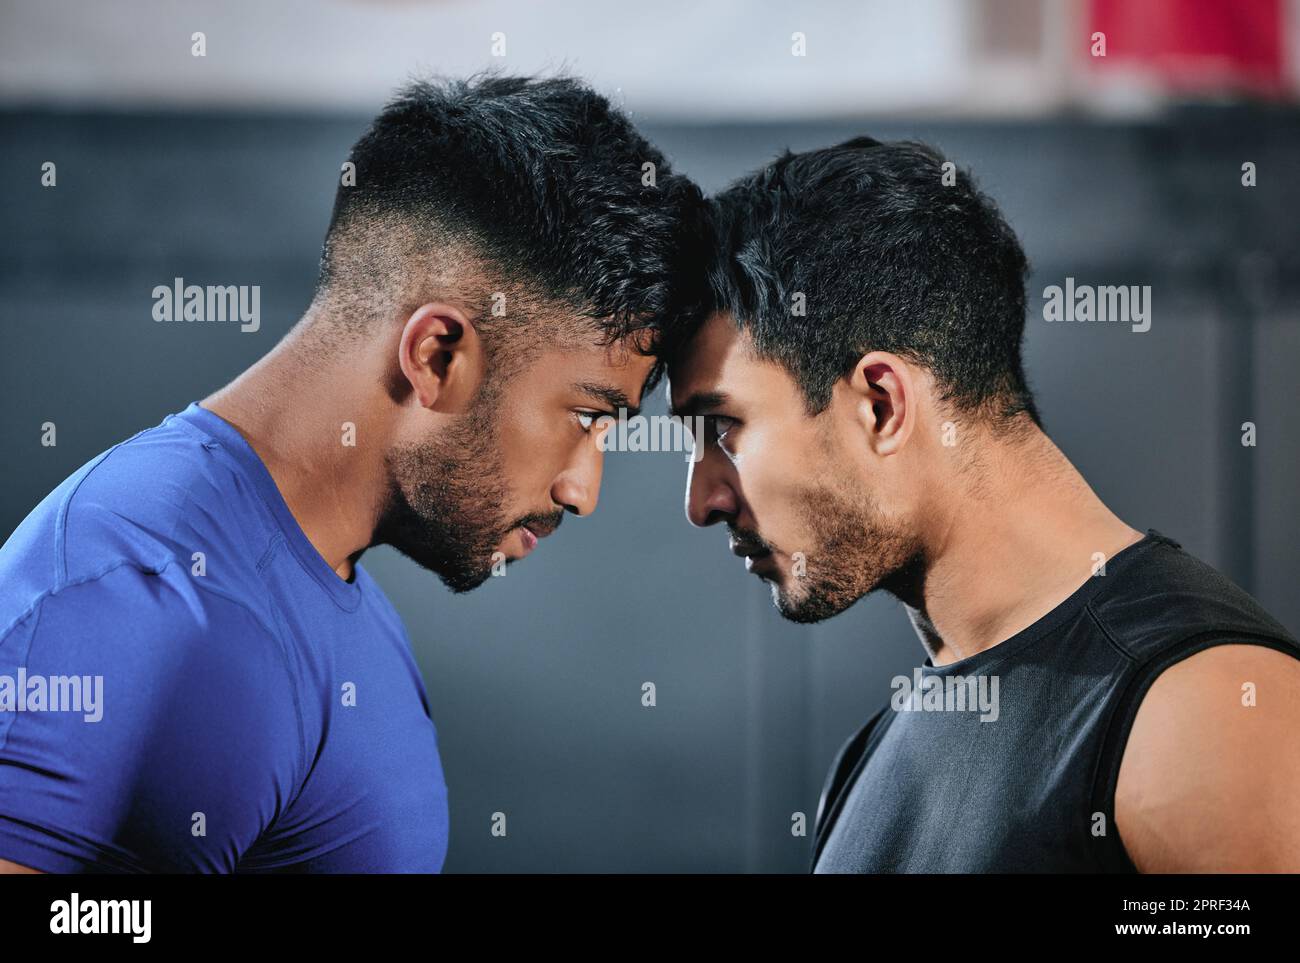 Healthy, serious and fit male athletes staring, facing and looking ready before a fight. Strong young men in an active challenge, a battle of power against strength and a motivation for winning. Stock Photo